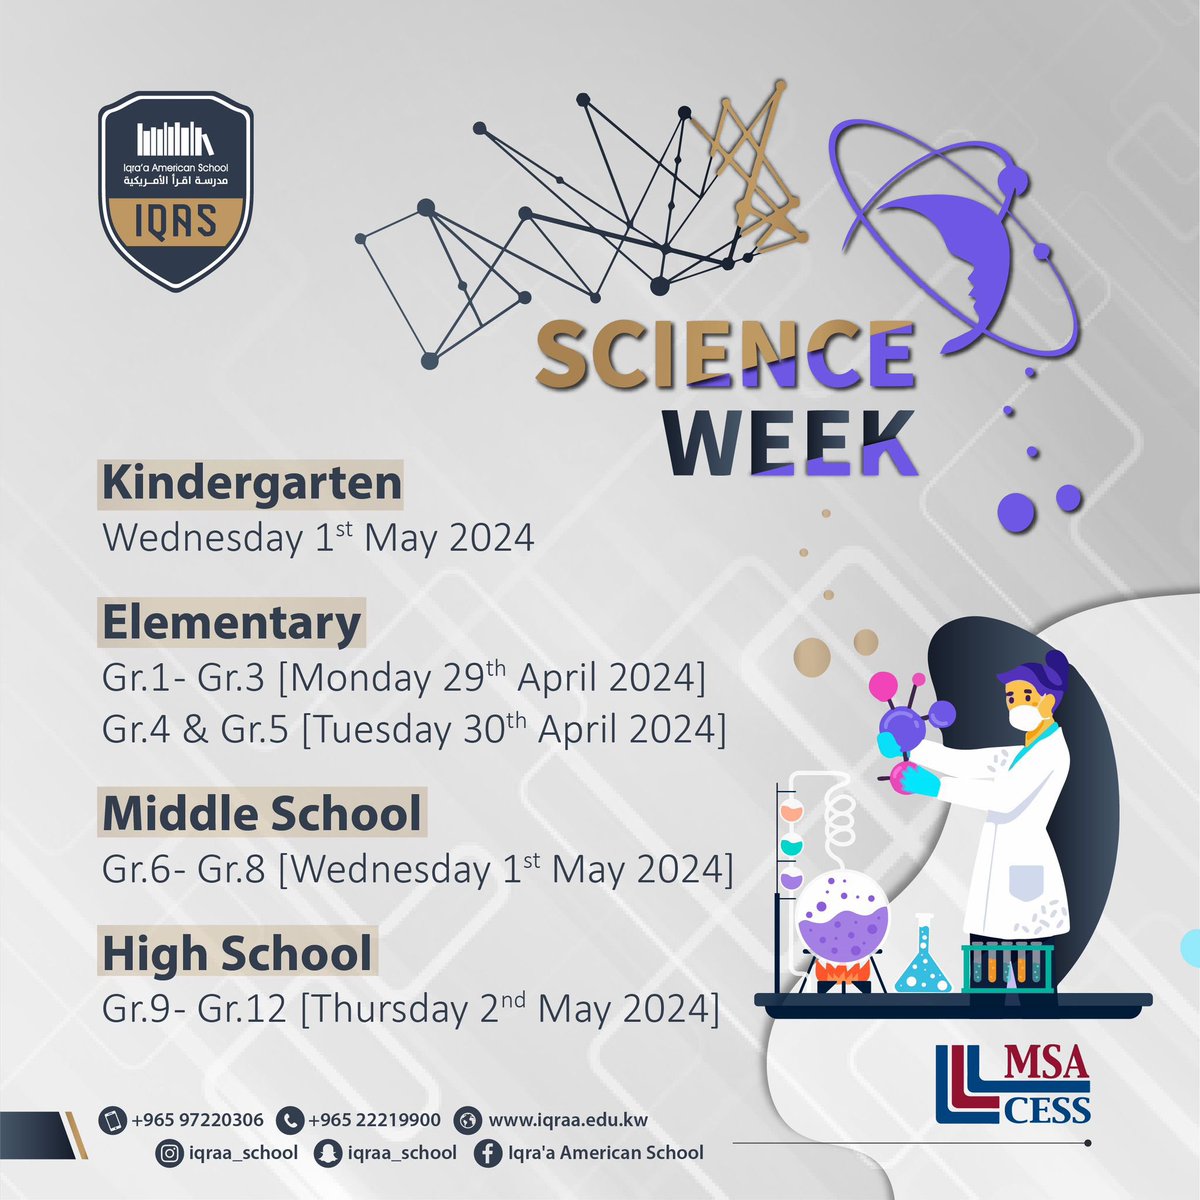 Science is not just a subject, it’s a way of thinking! This week, our halls are alive with the spirit of discovery and innovation. From curious experiments to groundbreaking projects, #ScienceWeek is where young minds shine brightest.